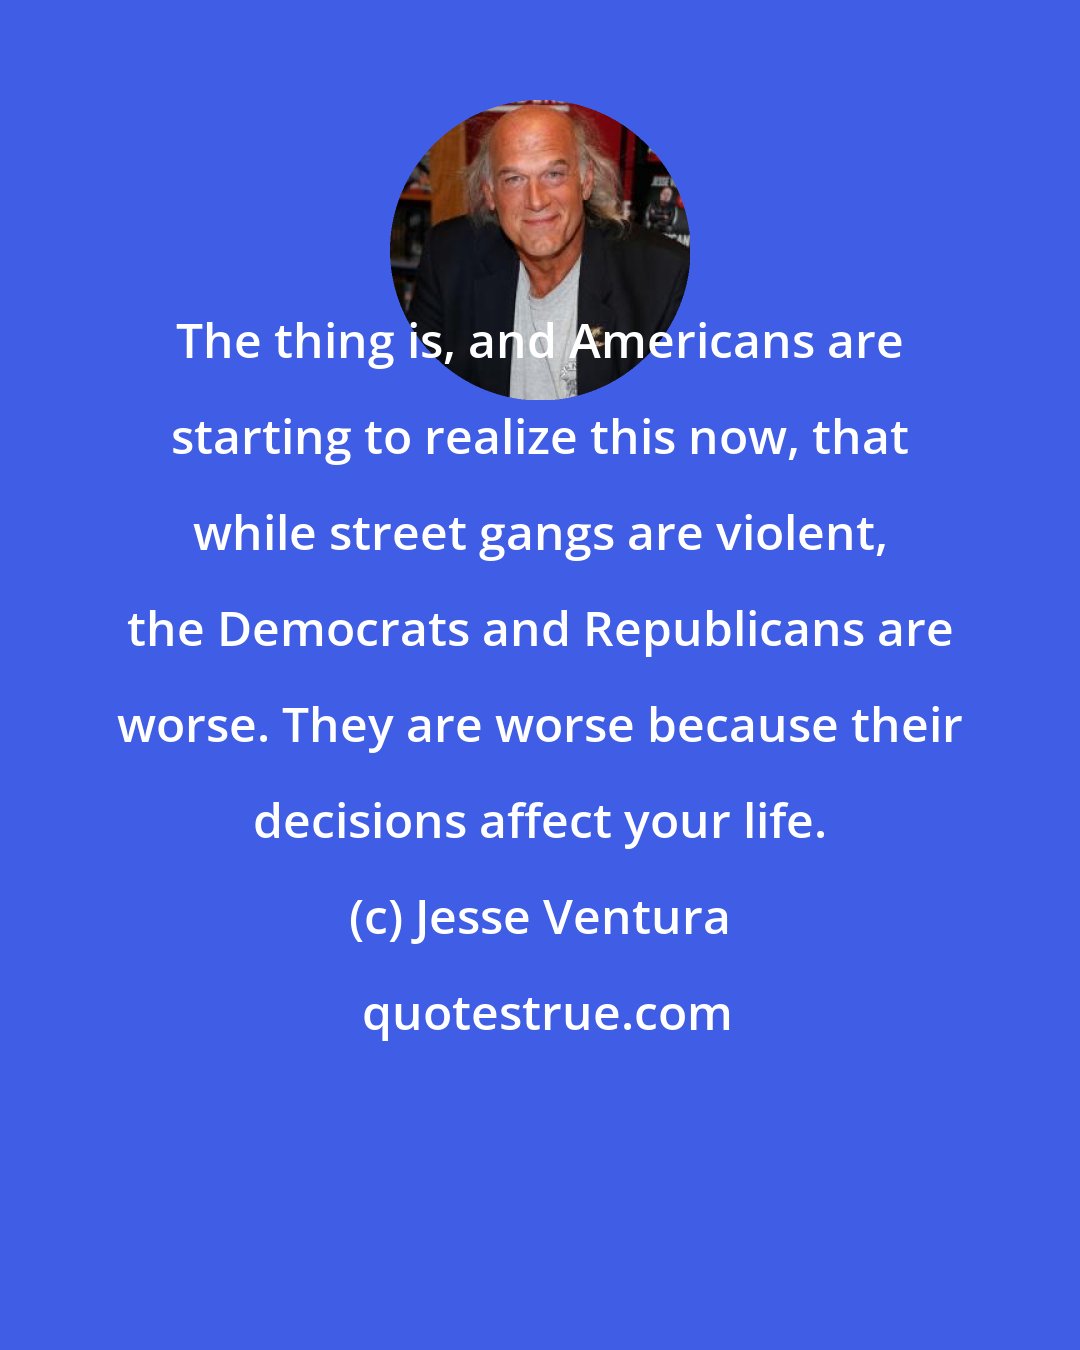 Jesse Ventura: The thing is, and Americans are starting to realize this now, that while street gangs are violent, the Democrats and Republicans are worse. They are worse because their decisions affect your life.